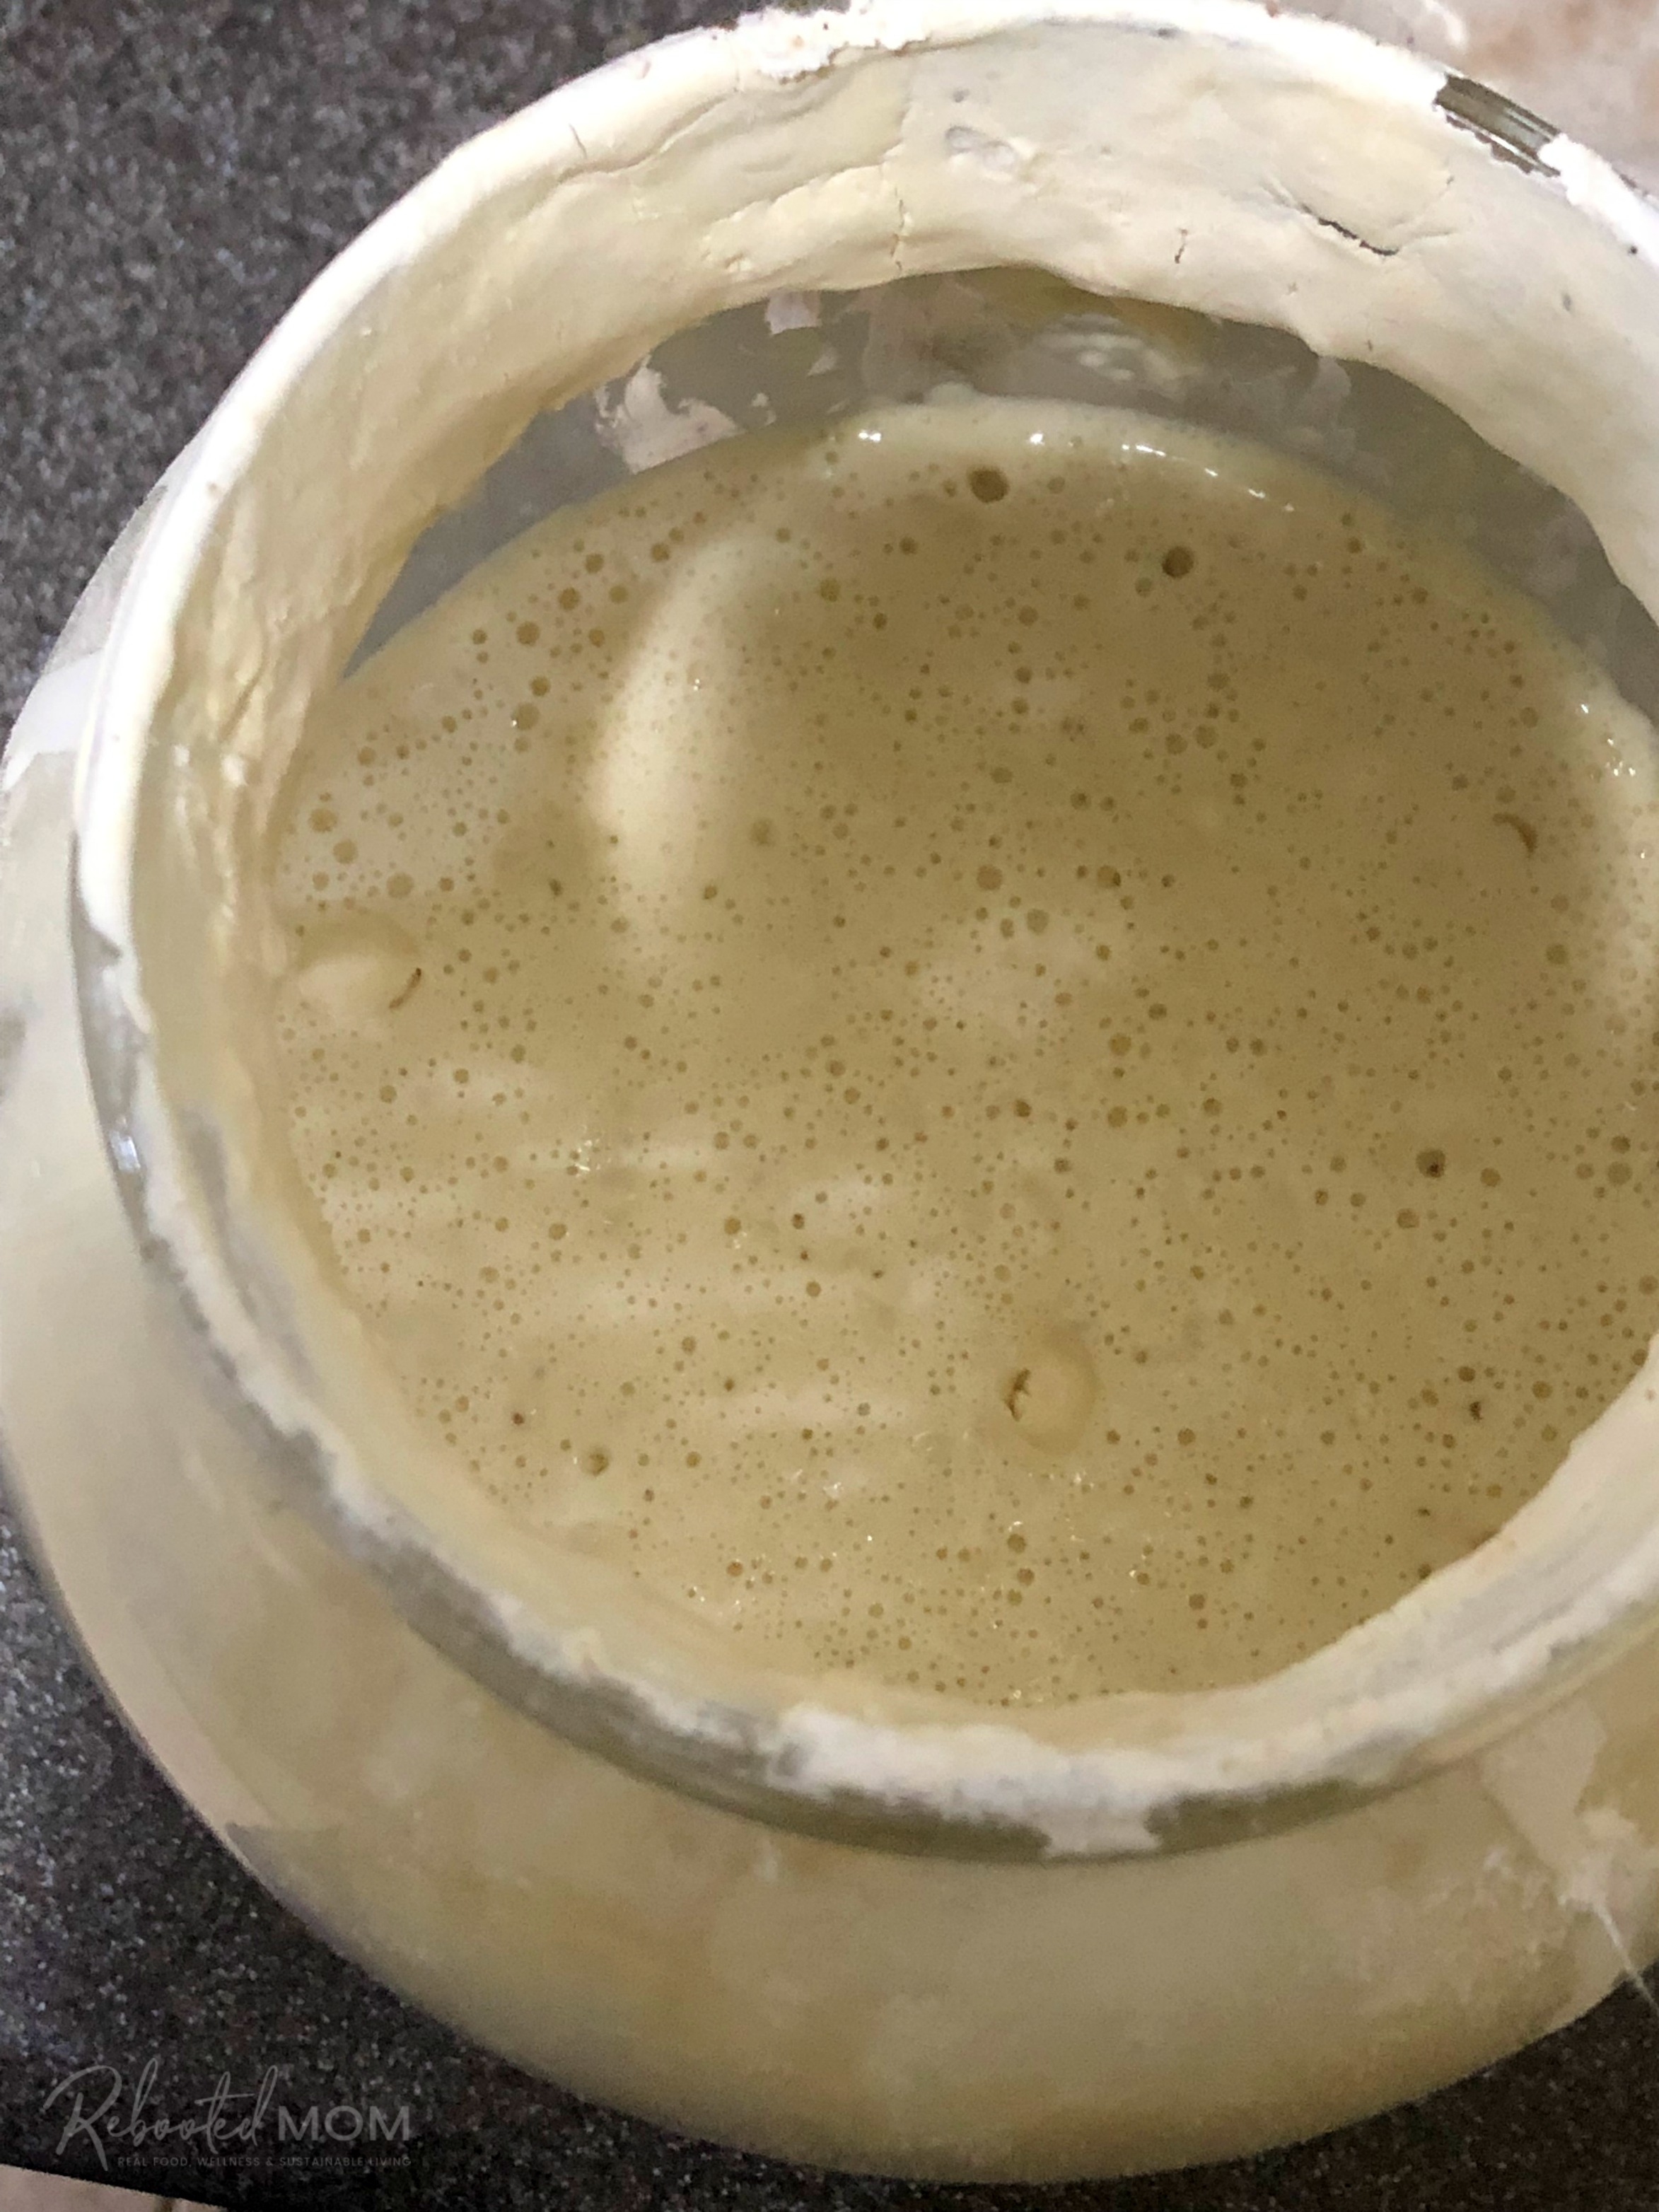 Bubbly sourdough starter \ Easy homemade sourdough bagels you can make at home with your own active sourdough starter. This step by step tutorial makes the most delicious bagels!